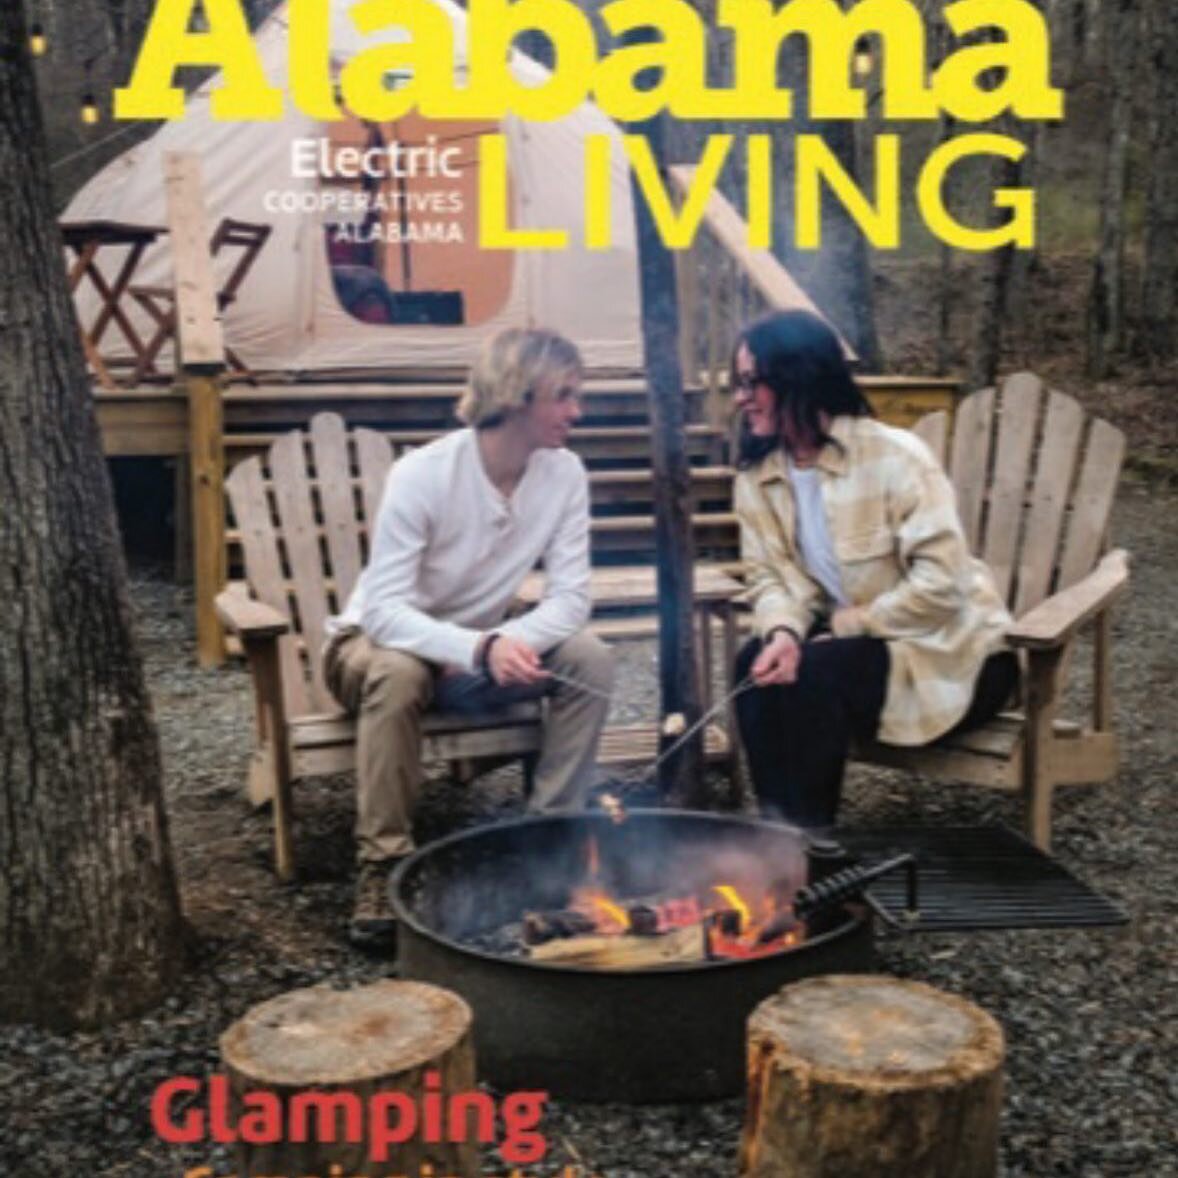 Thanks to @alabama_living for the feature in your May issue! @land_of_bohamia is excited to share the outdoor experience in our comfortable artist inspired glamps.